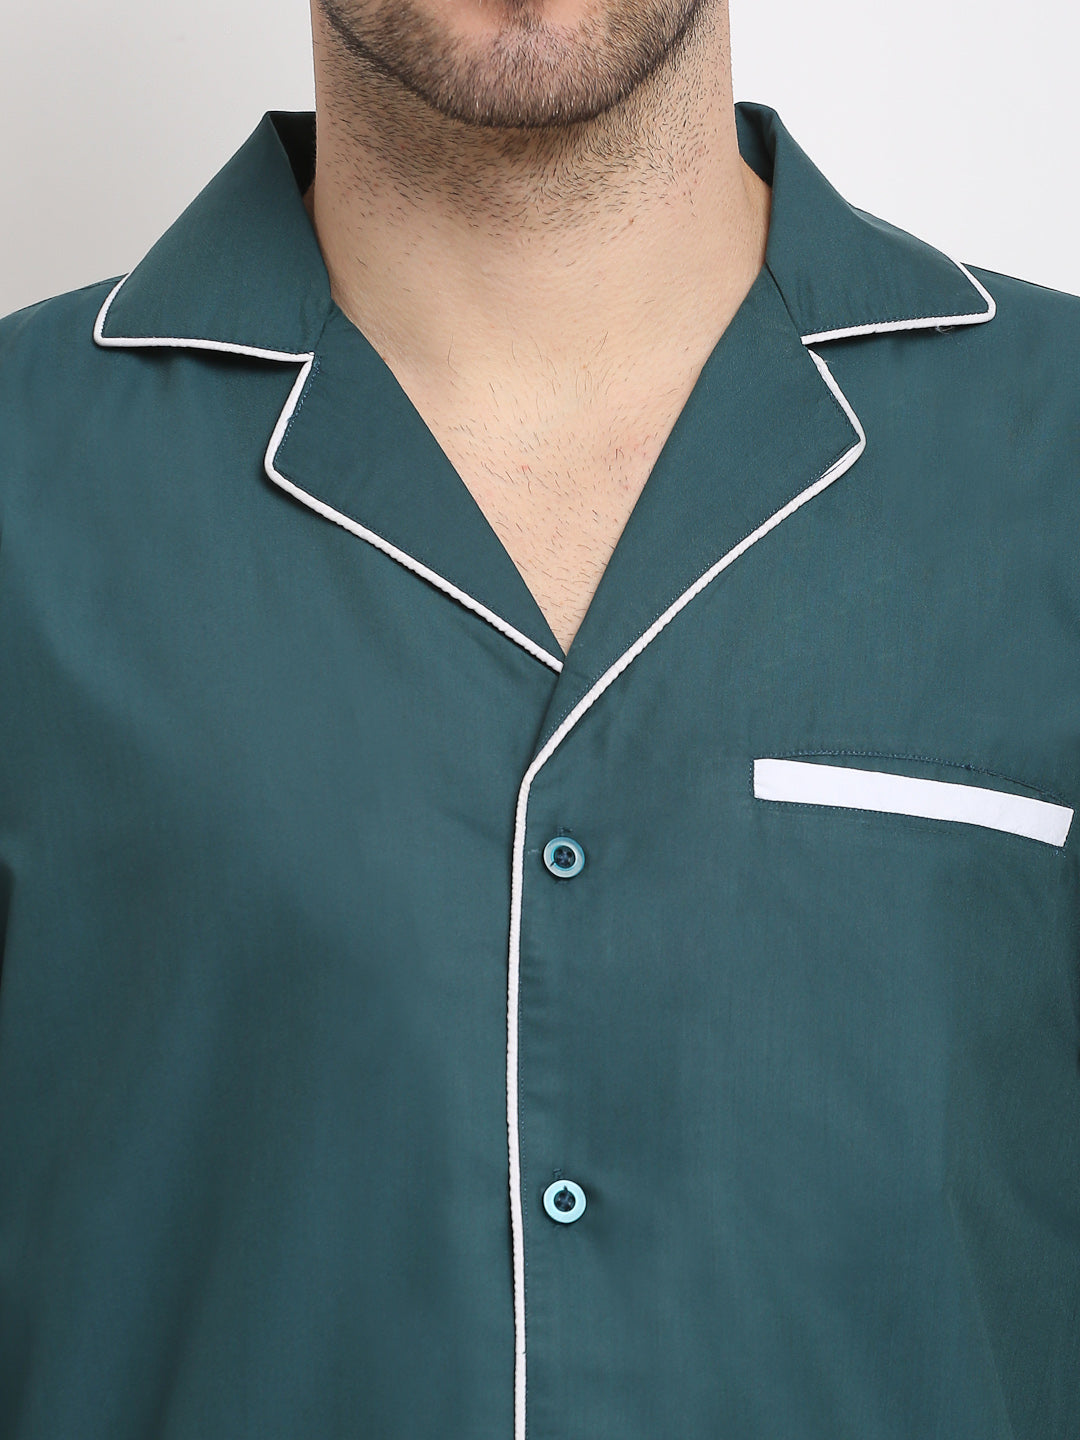 Men's Teal Cotton Solid Night Suits ( GNS 003Teal ) - Jainish